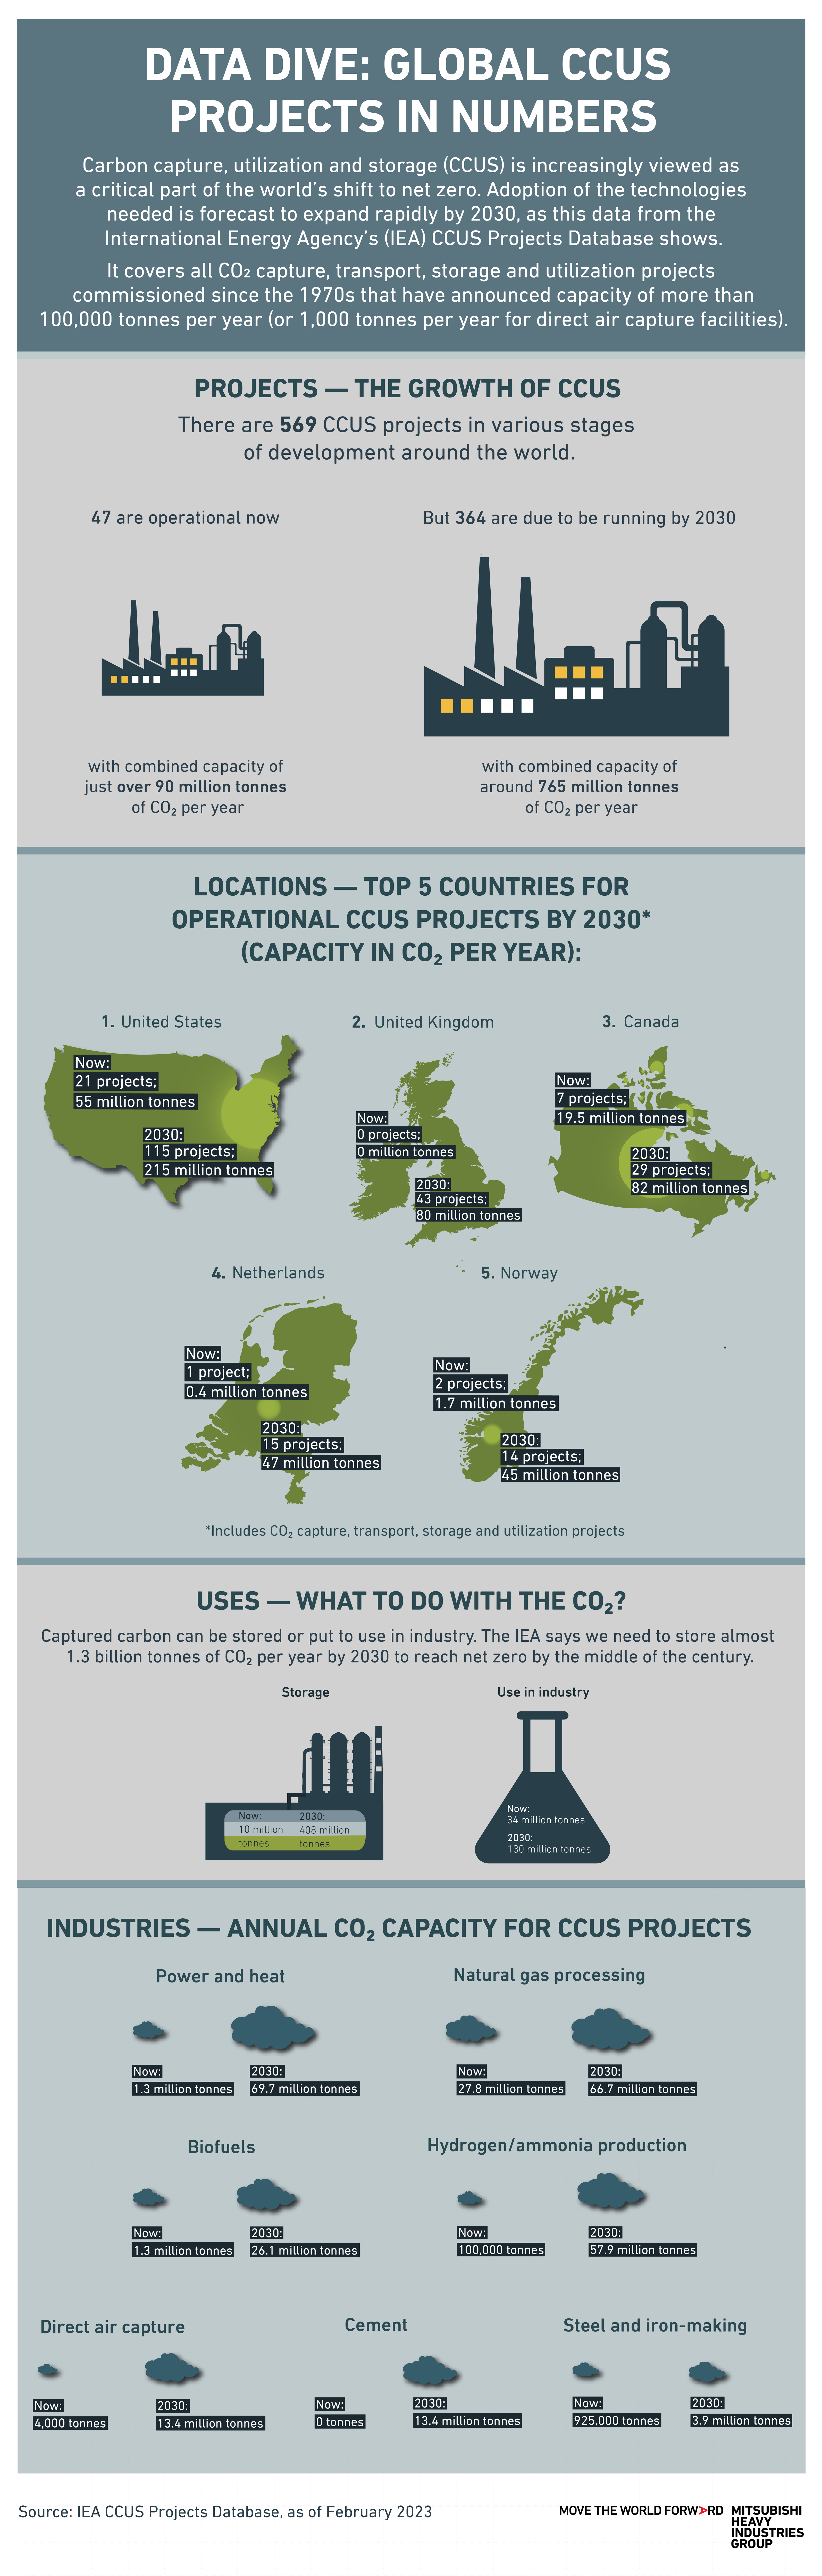 Adoption of CO2 capture is expected to expand rapidly by 2030